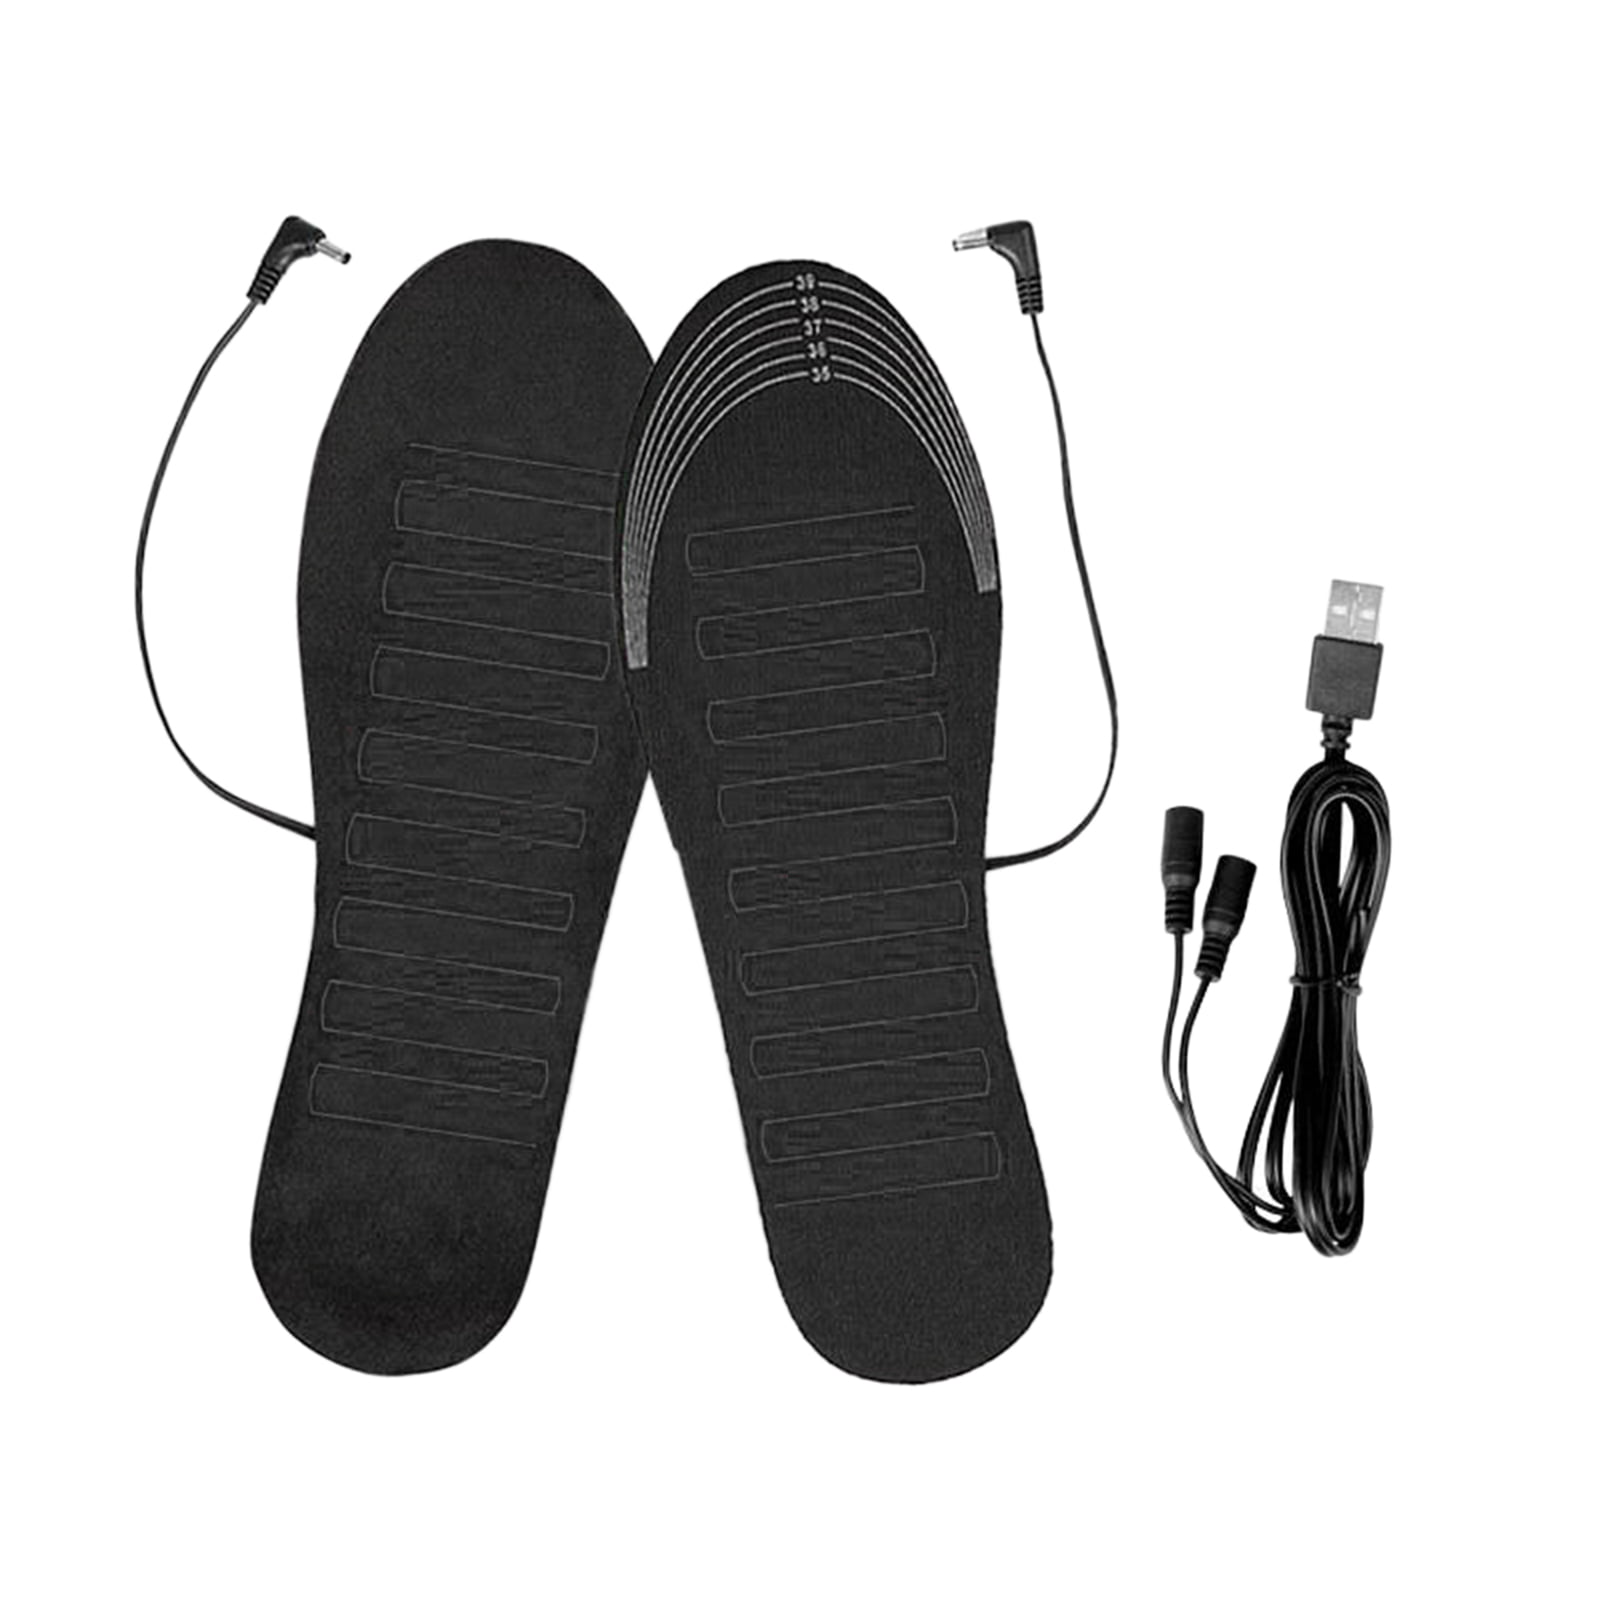 Winter Warm USB Heating Insoles Electric Powered Feet Shoes Sports Equipment 